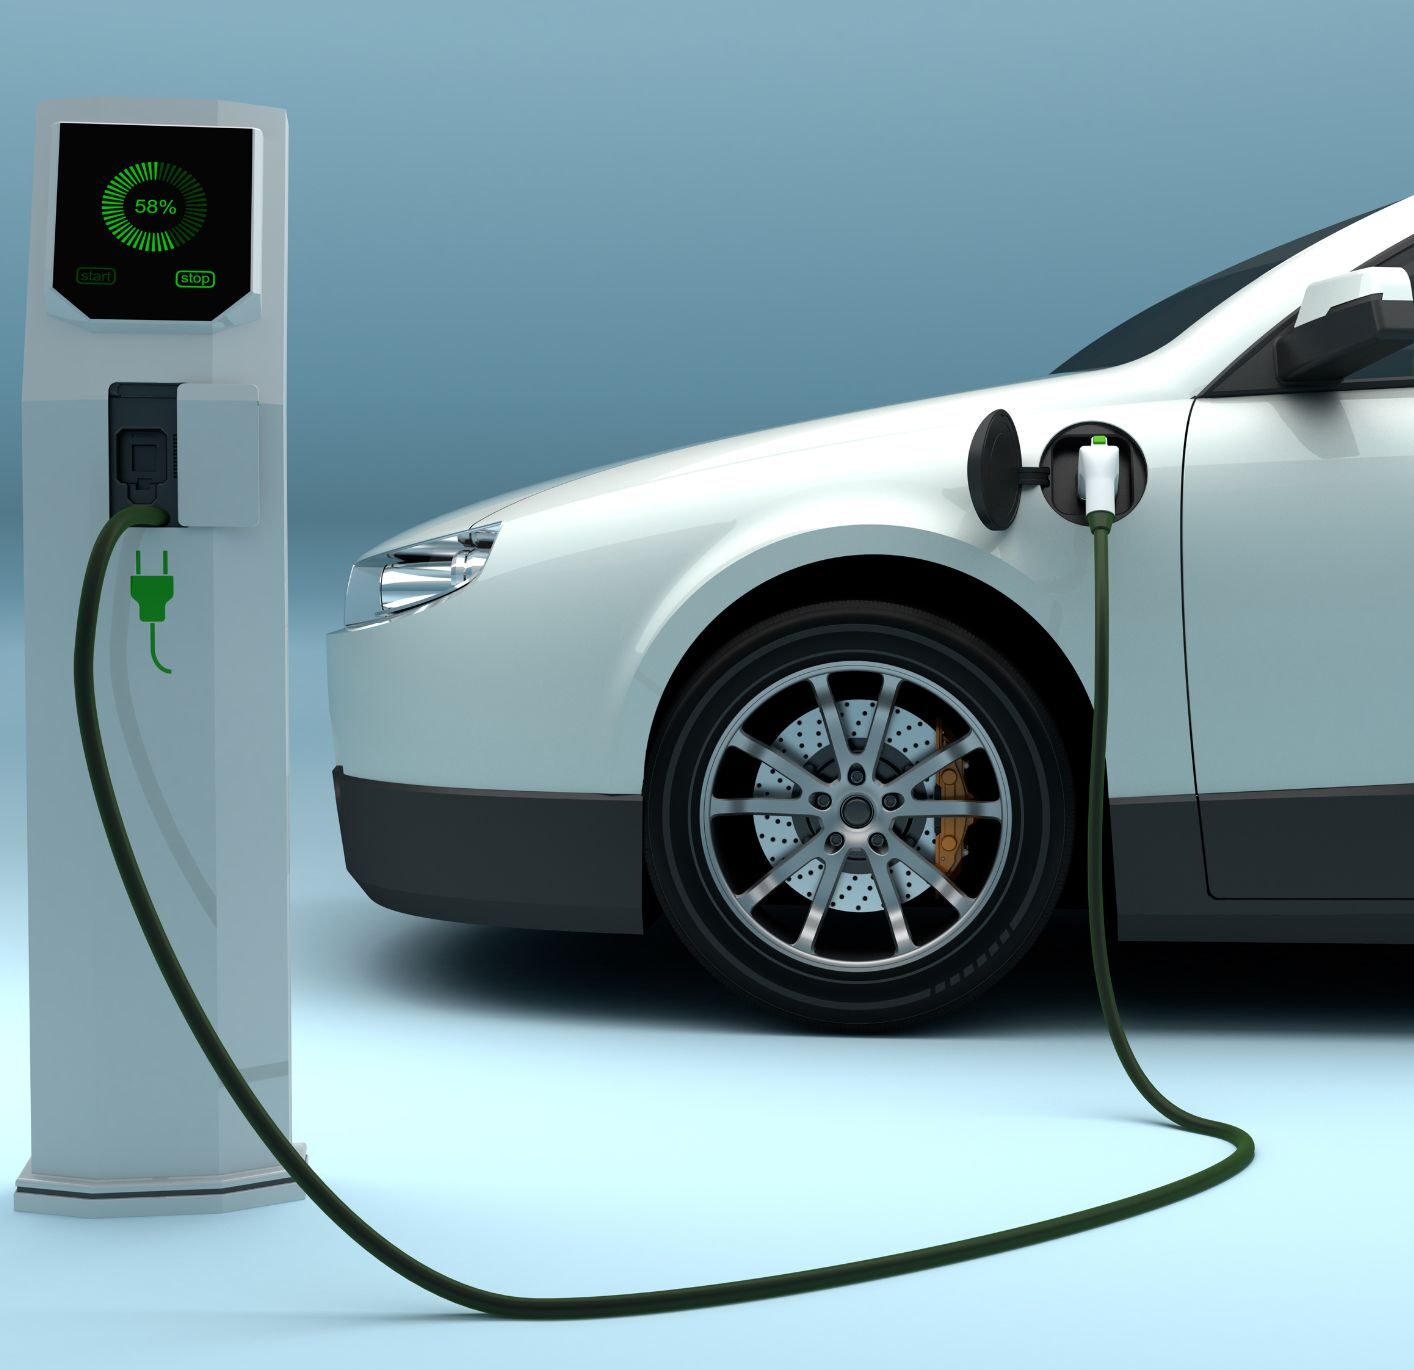 AMD - Installation of Electric Car Charger